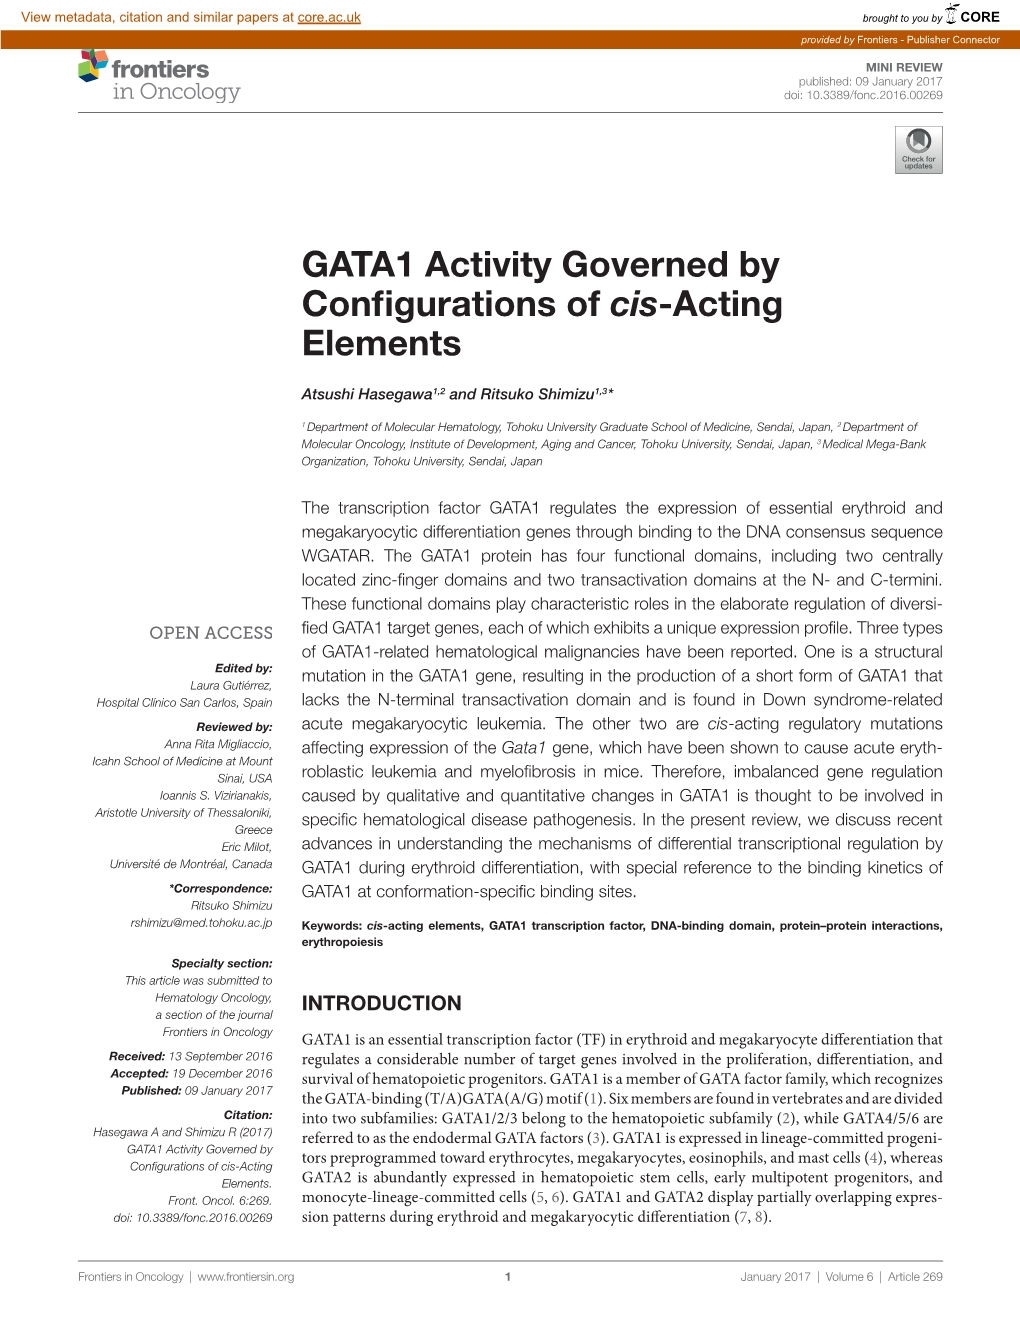 GATA1 Activity Governed by Configurations of Cis-Acting Elements